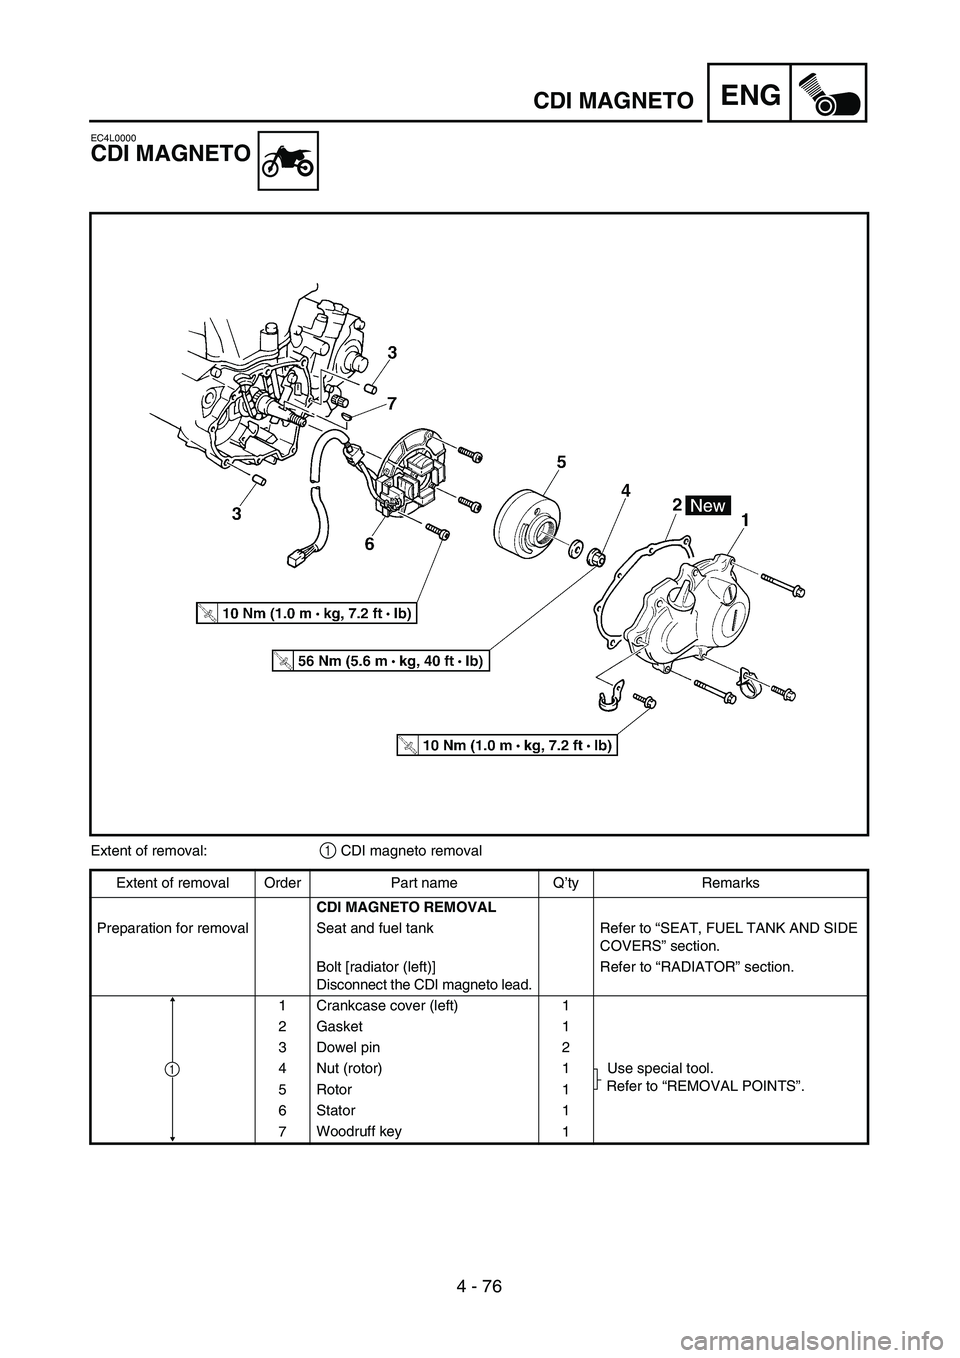 YAMAHA YZ450F 2004  Owners Manual 4 - 76
ENGCDI MAGNETO
EC4L0000
CDI MAGNETO
Extent of removal:1 CDI magneto removal
Extent of removal Order Part name Q’ty Remarks
CDI MAGNETO REMOVAL
Preparation for removal Seat and fuel tank Refer